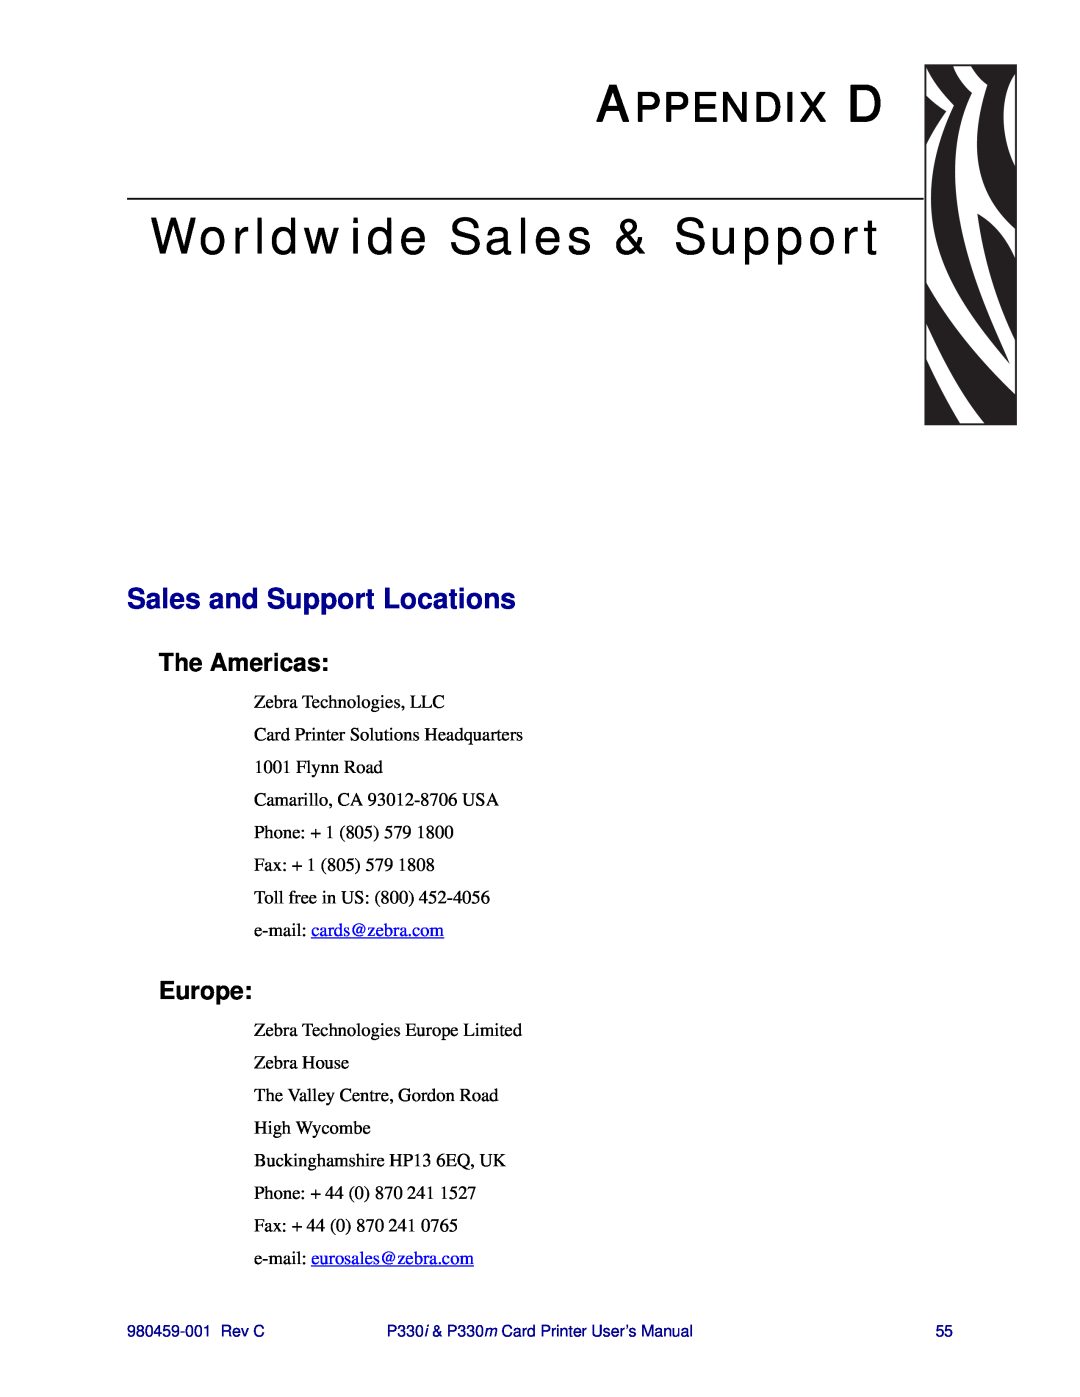 Zebra Technologies P330m, P330i Worldwide Sales & Support, Appendix D, Sales and Support Locations, The Americas, Europe 